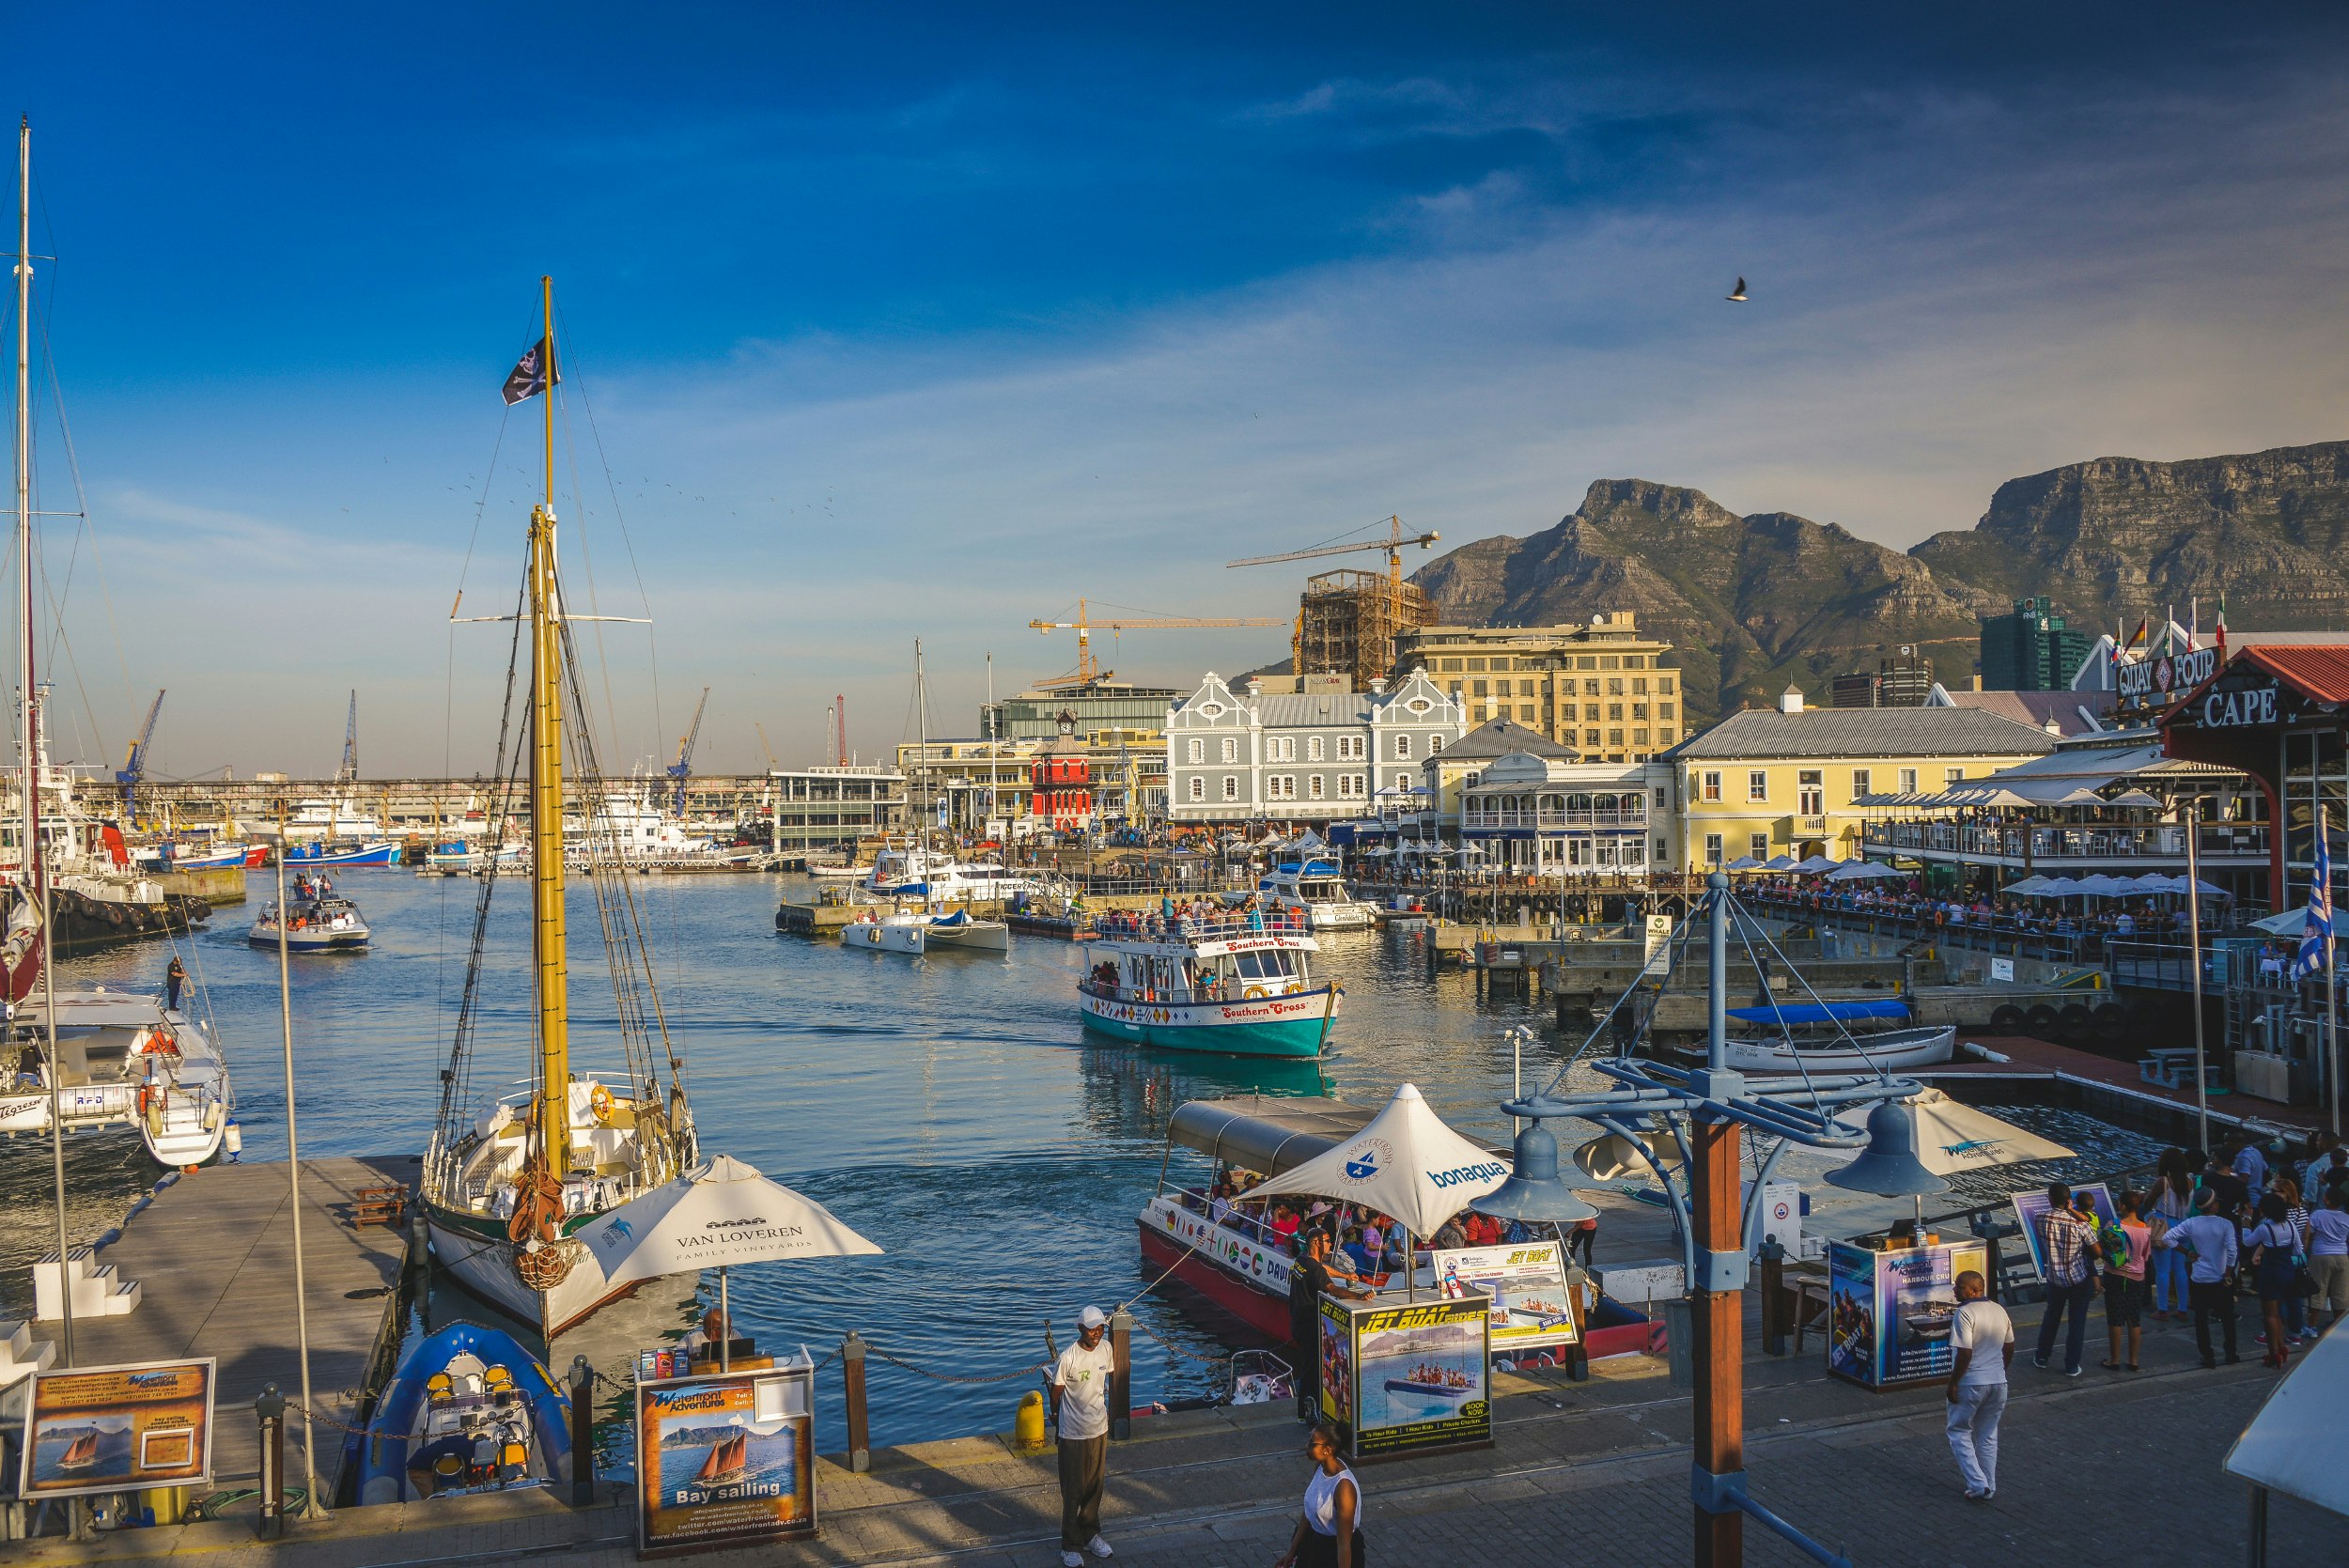 Tourist boats come and go from the energetic harbour; people mill on the docks for boats; birds fly and Table Mountain looms in the background.